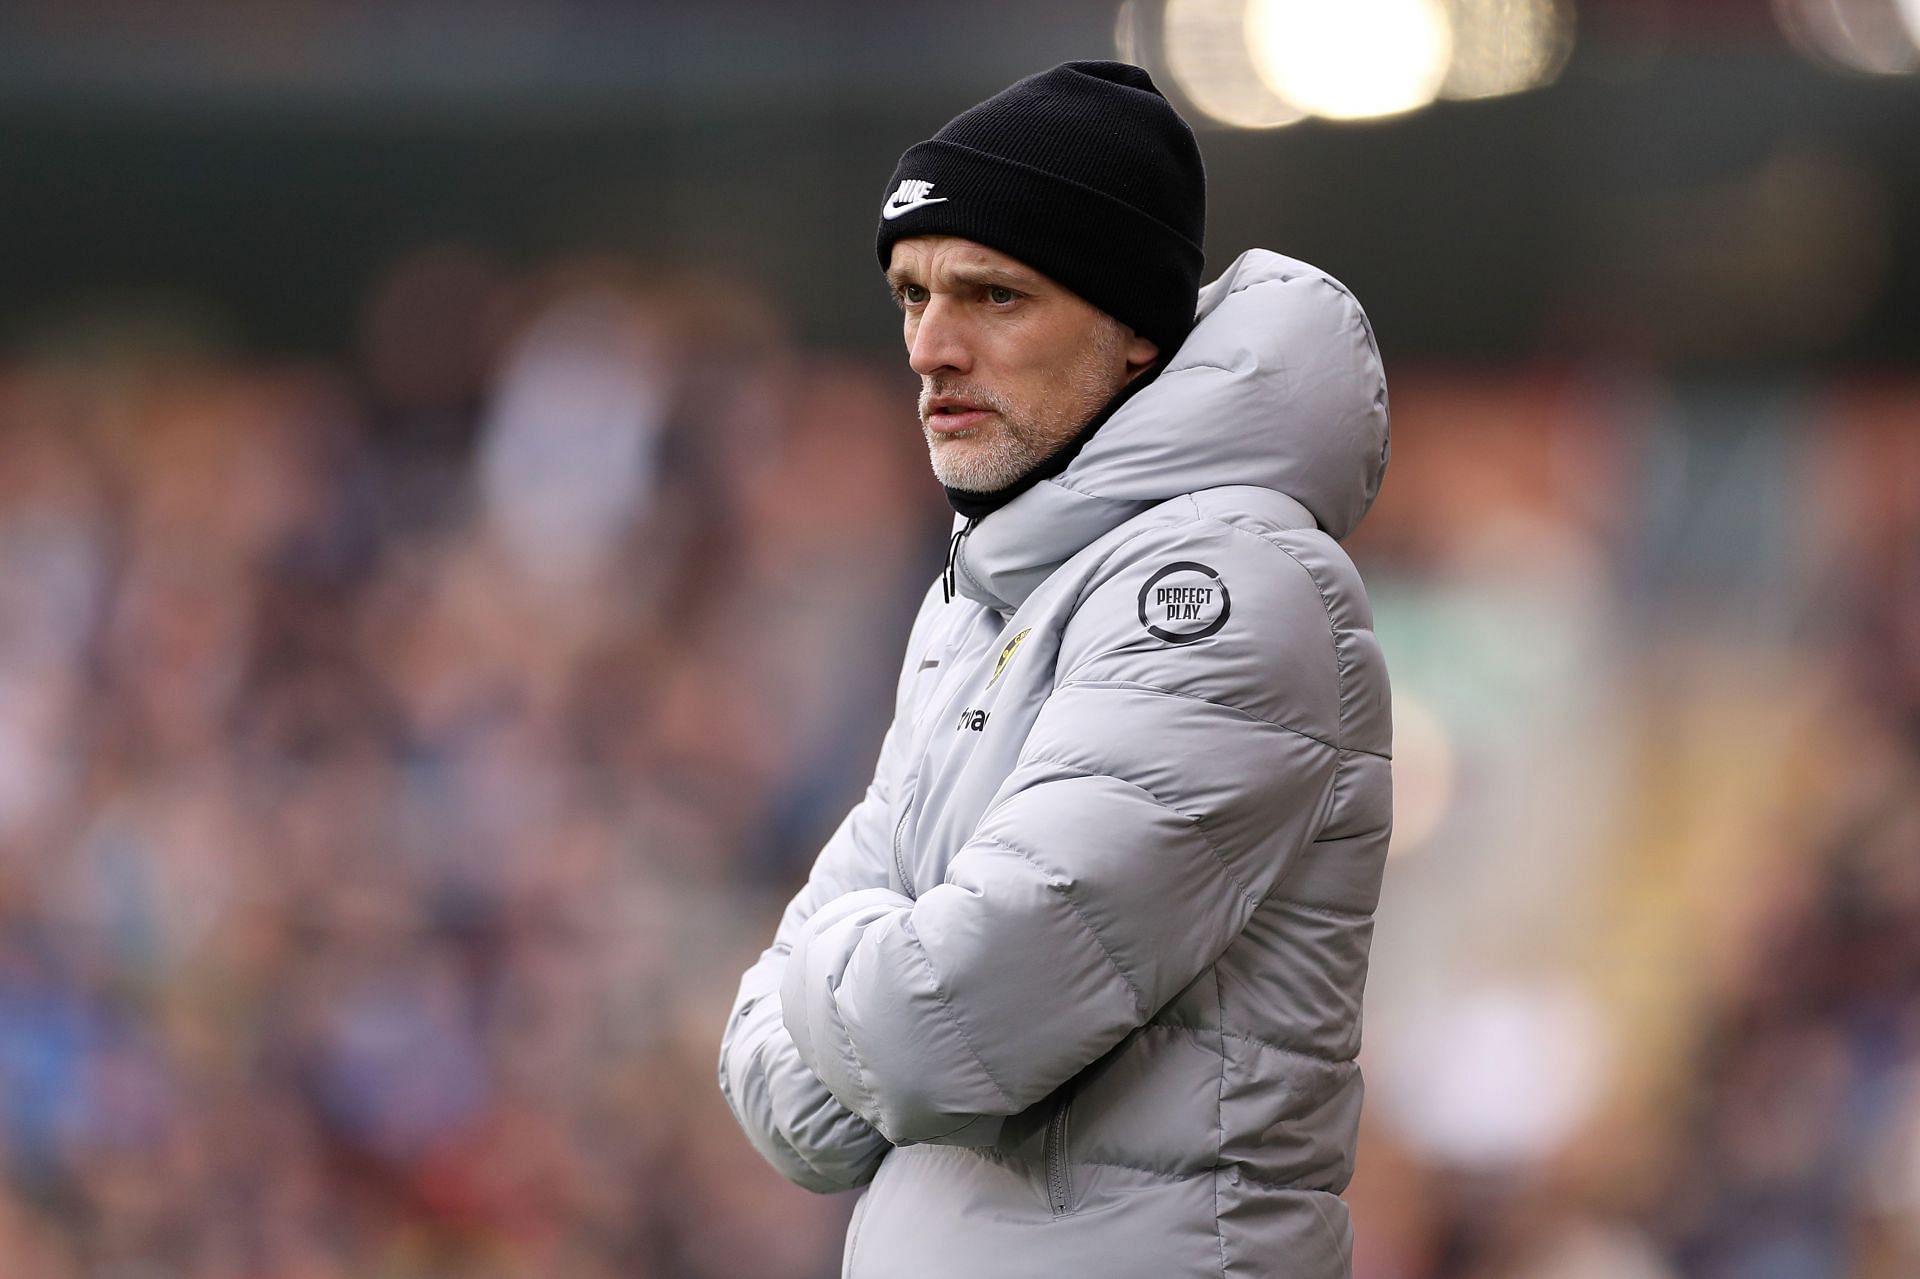 Chelsea manager Thomas Tuchel is ready to face Crystal Palace.